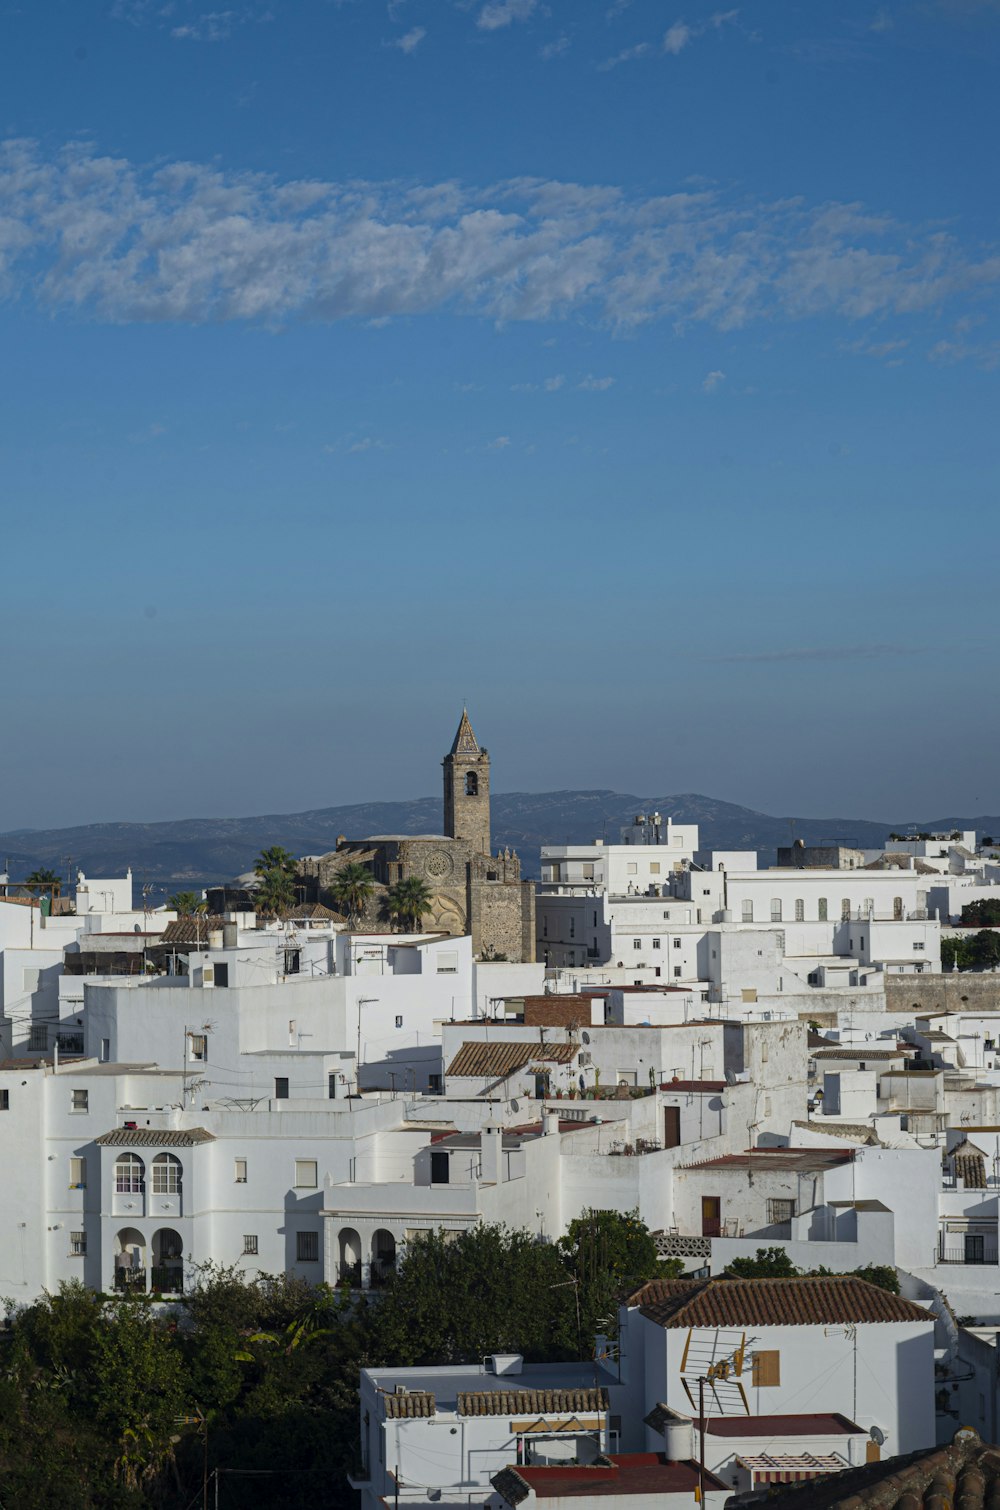 a city with white buildings and a clock tower